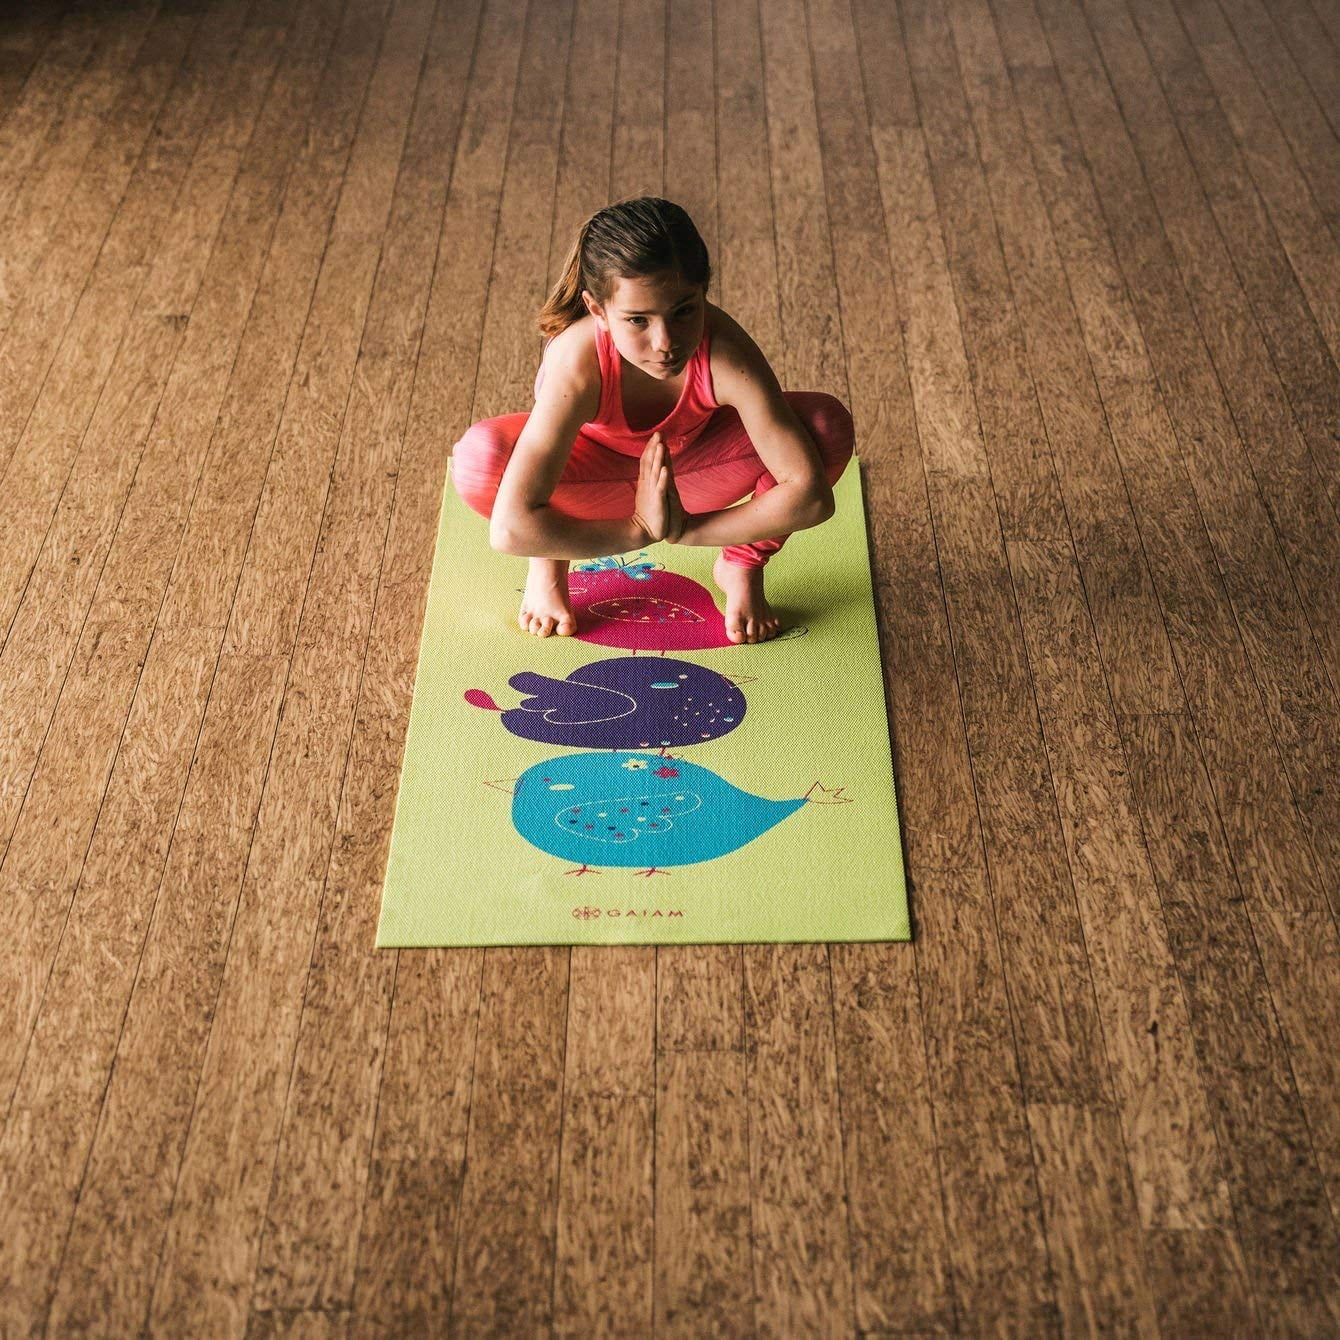 Gaiam Kids Yoga Mat Exercise Mat, Yoga for Kids with Fun Prints - Playtime  for Babies, Active & Calm Toddlers and Young Children, Birdsong, 3mm, Mats  -  Canada